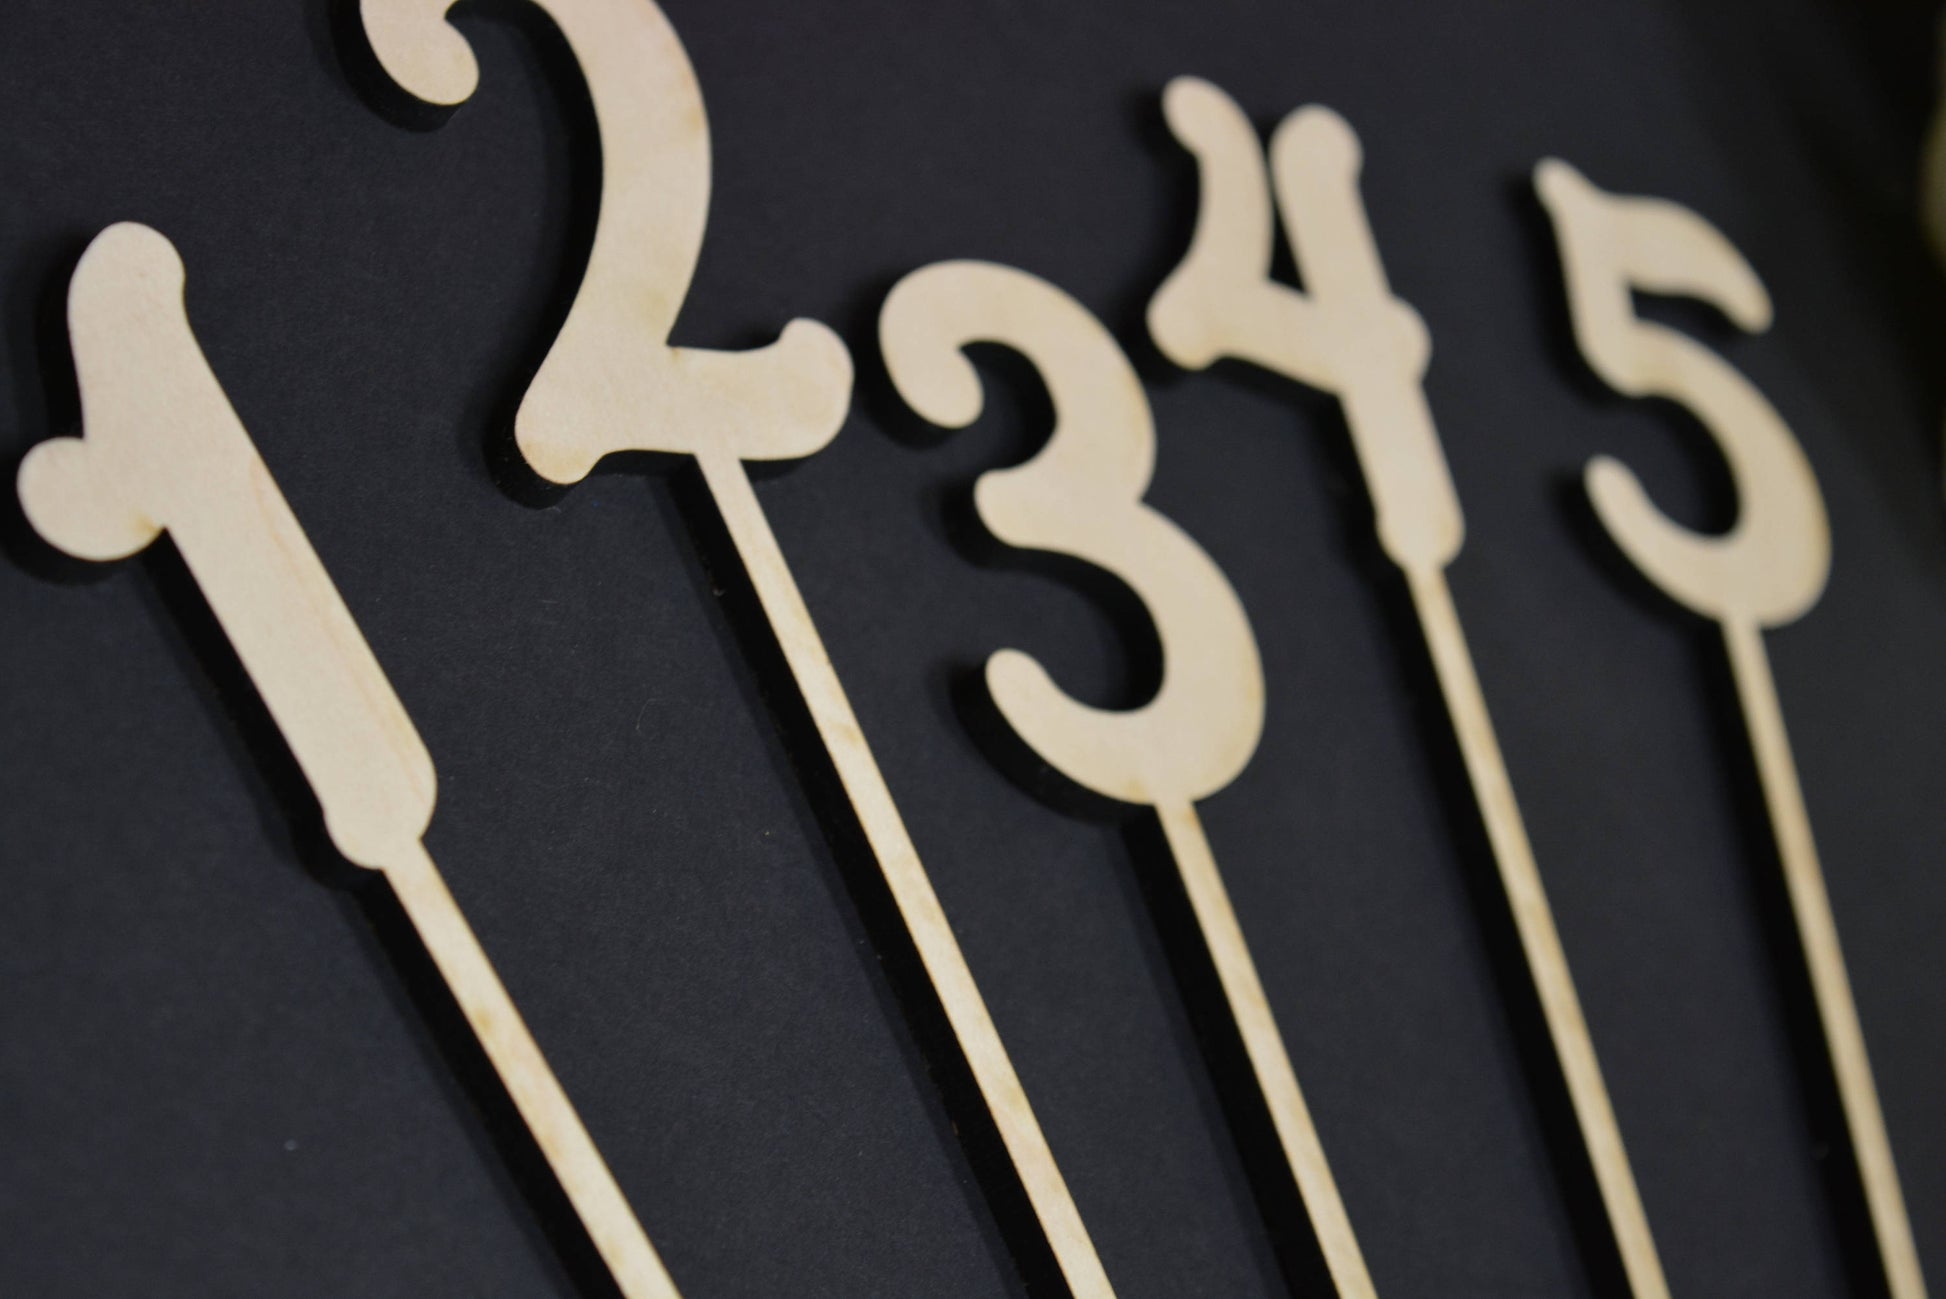 Wedding Table Numbers on sticks / attached stakes. Wooden Table